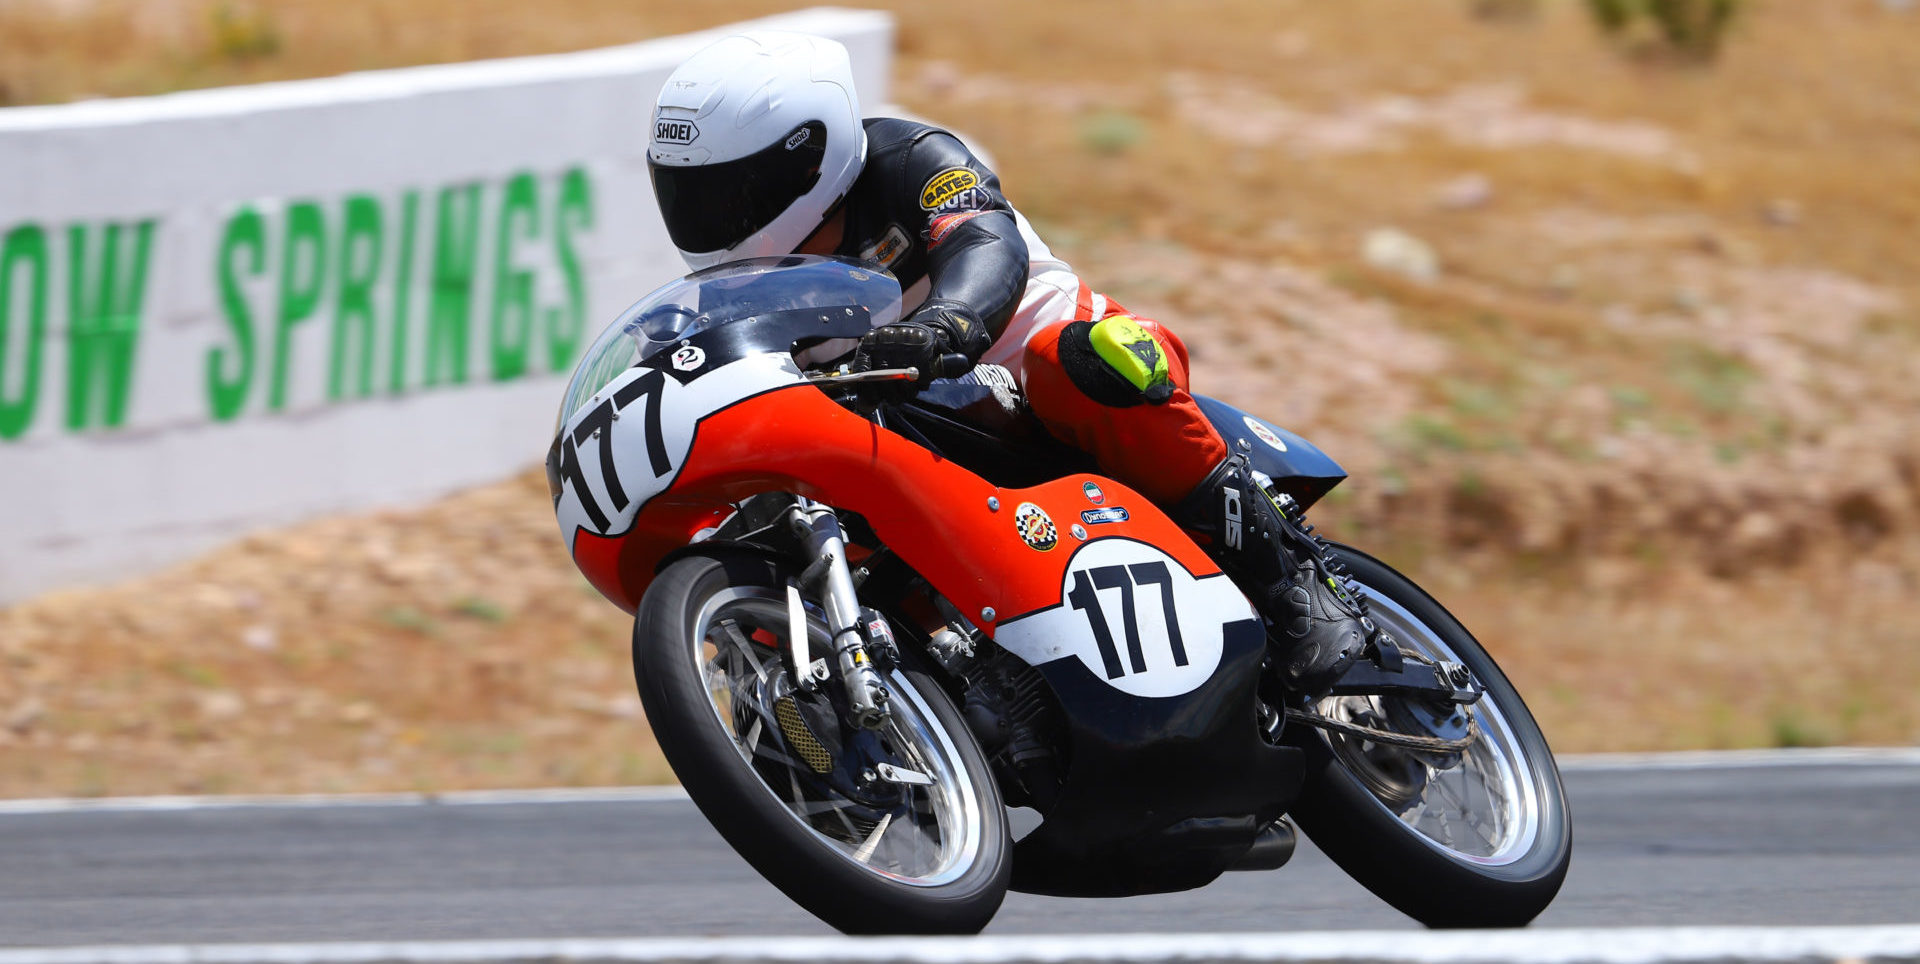 Walt Fulton (177) in action with AHRMA at Willow Springs in 2019. Photo by etechphoto.com, courtesy of AHRMA.